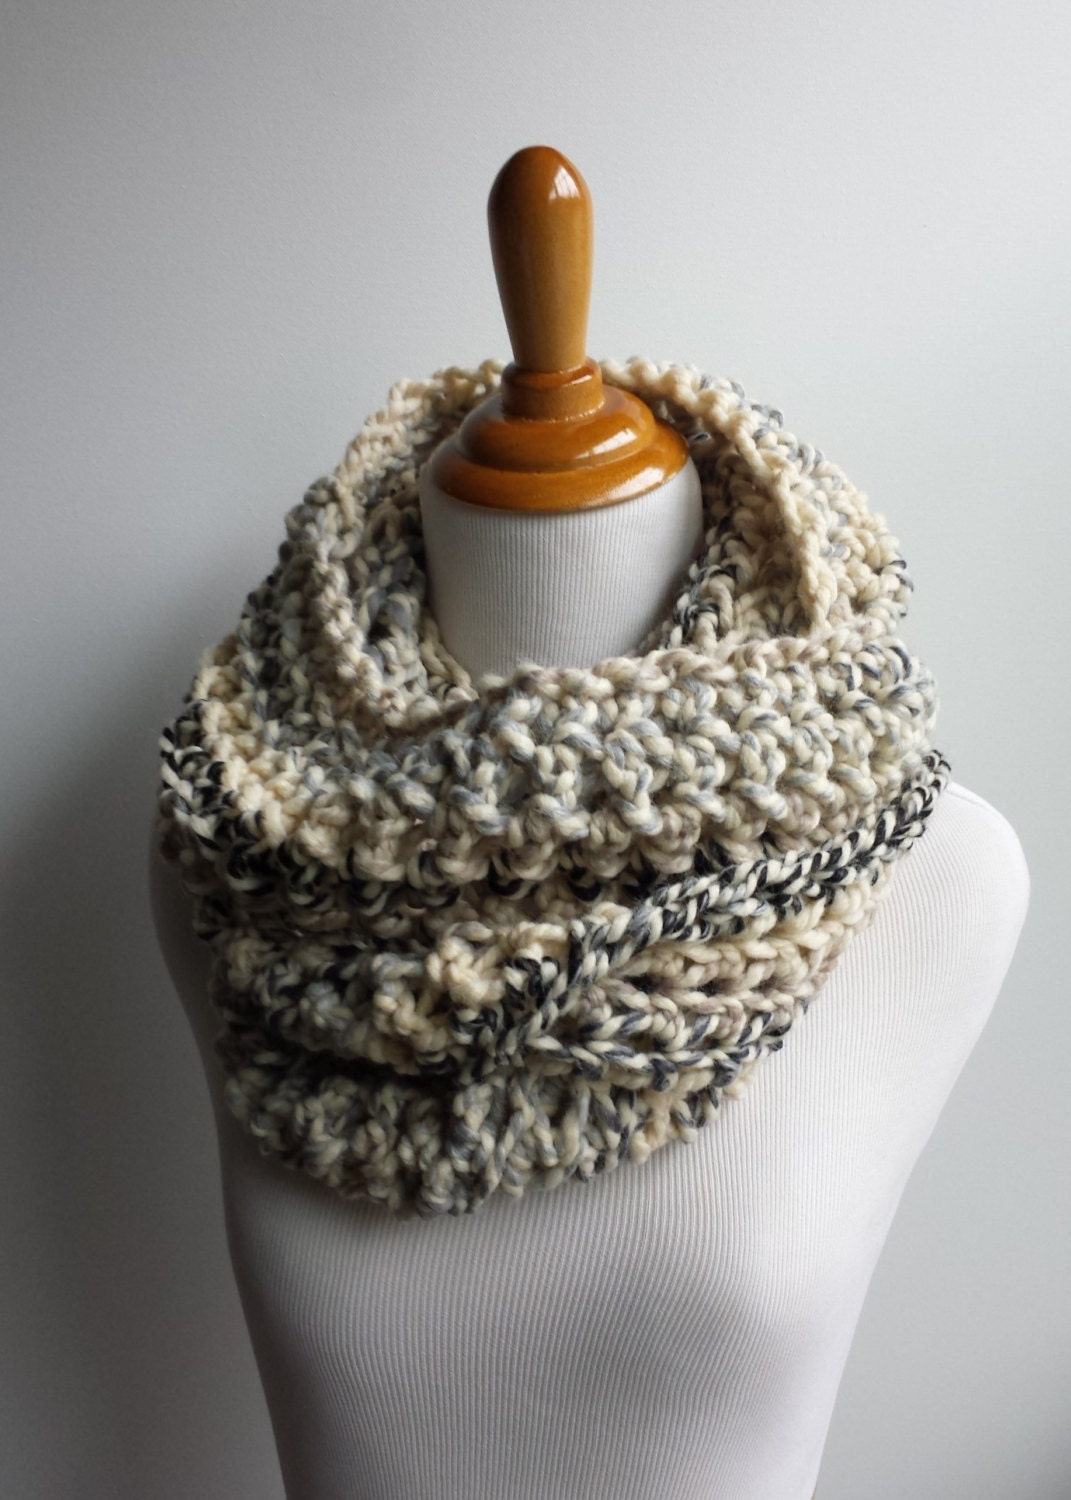 Chunky Scarf Cowl Scarf Infinity Scarf Thick Scarf Circle - Etsy